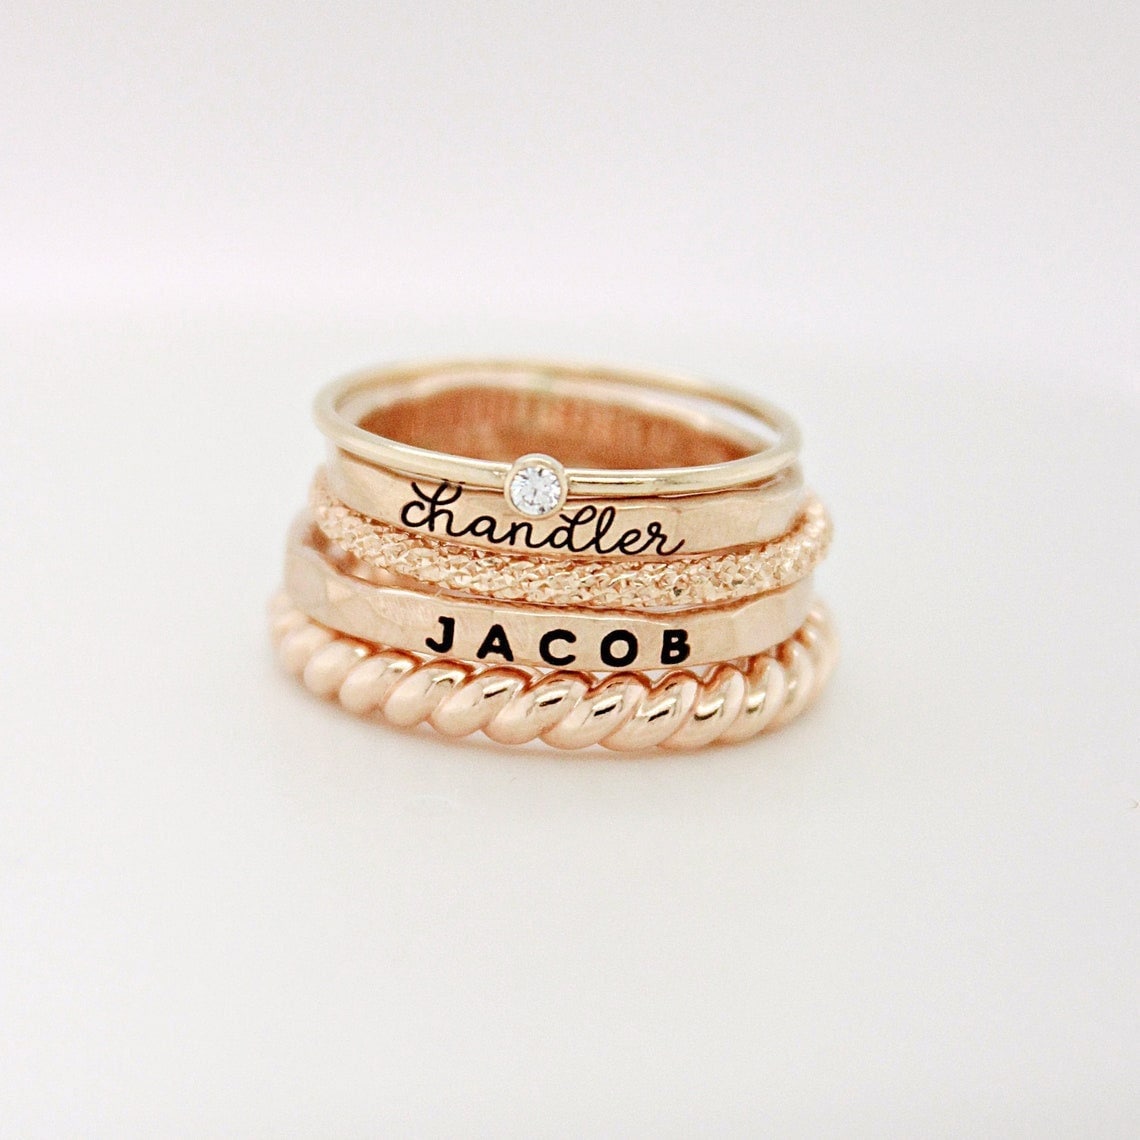 Personalized Ring Dainty Name Ring Stacking Ring Stackable Name Ring Mothers Day Gift Personalize Mother Ring Stackable Ring Set Sieraden Ringen Stapelbare ringen 